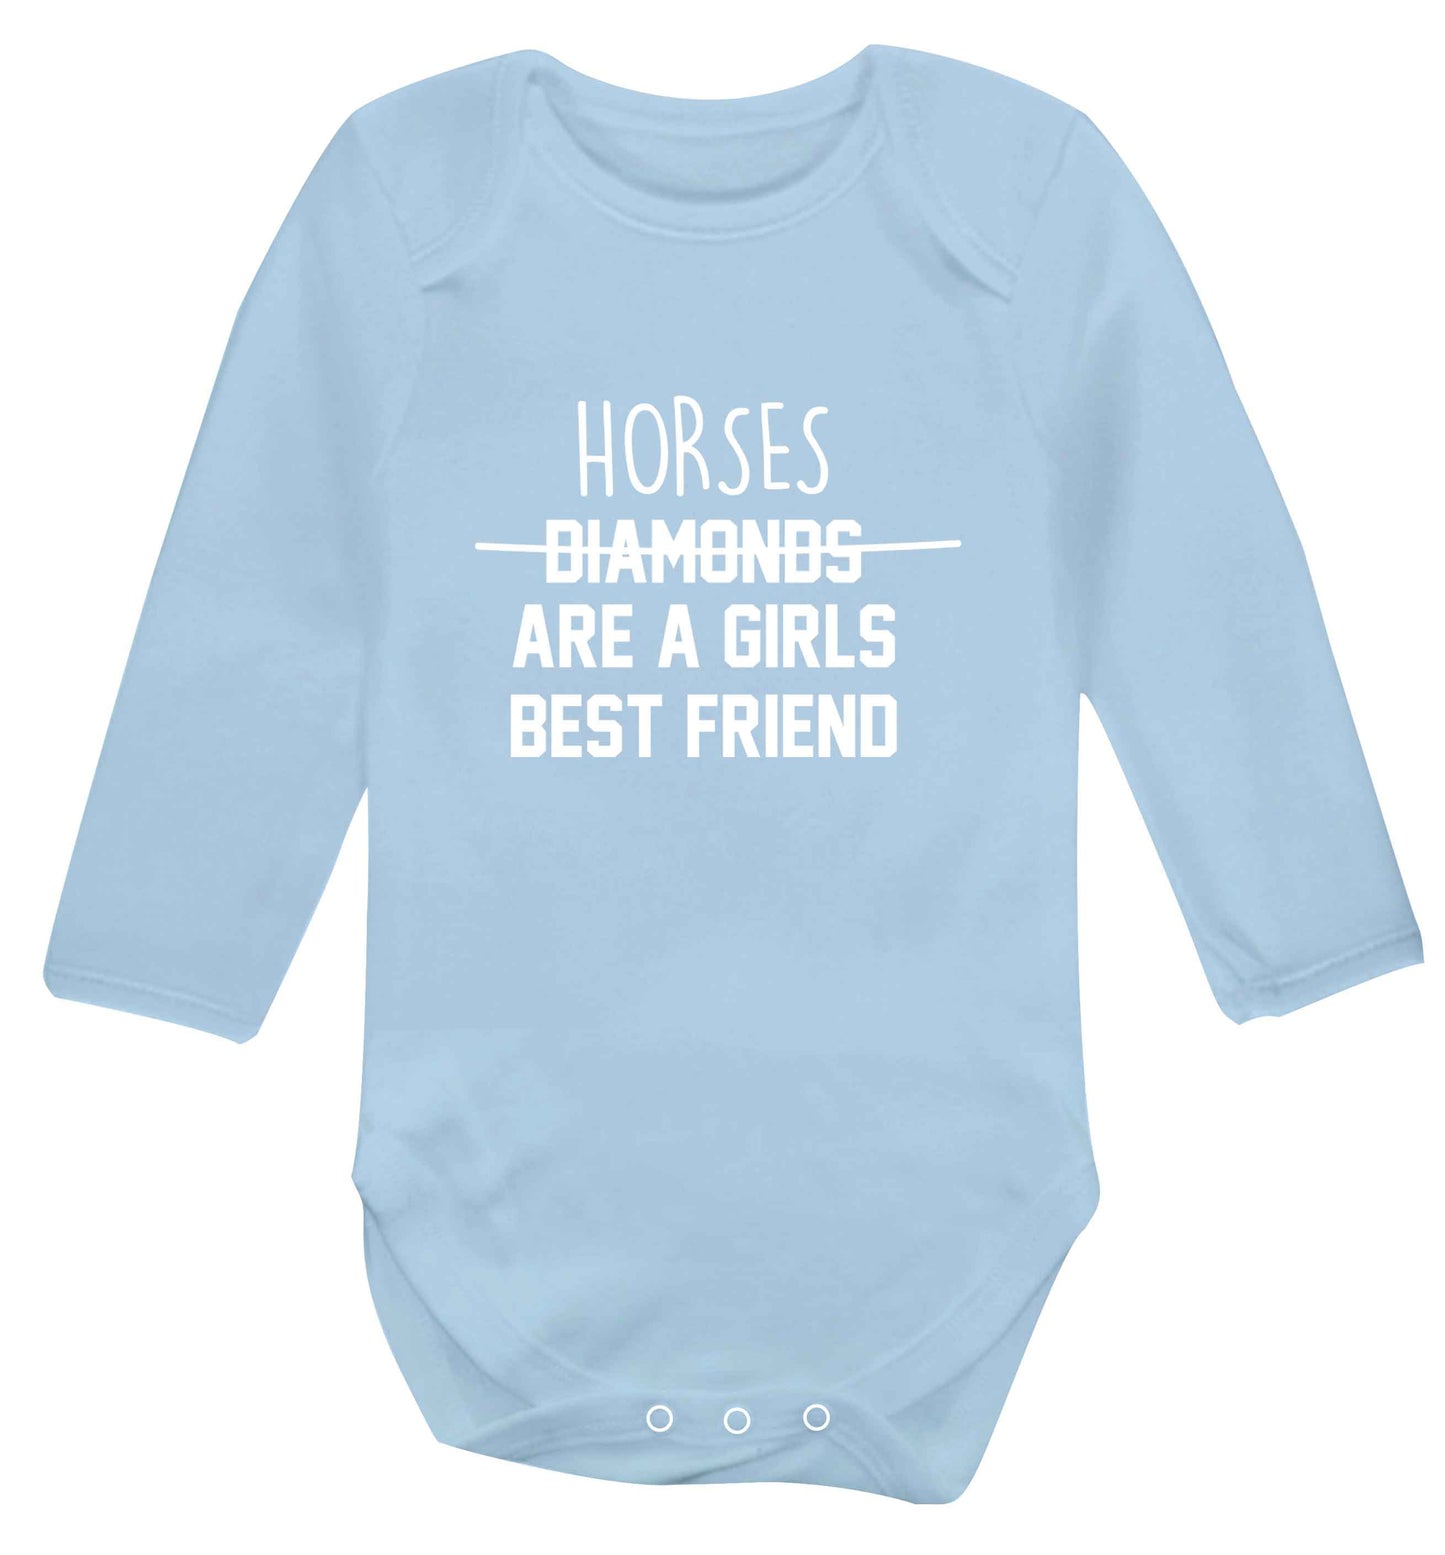 Horses are a girls best friend baby vest long sleeved pale blue 6-12 months